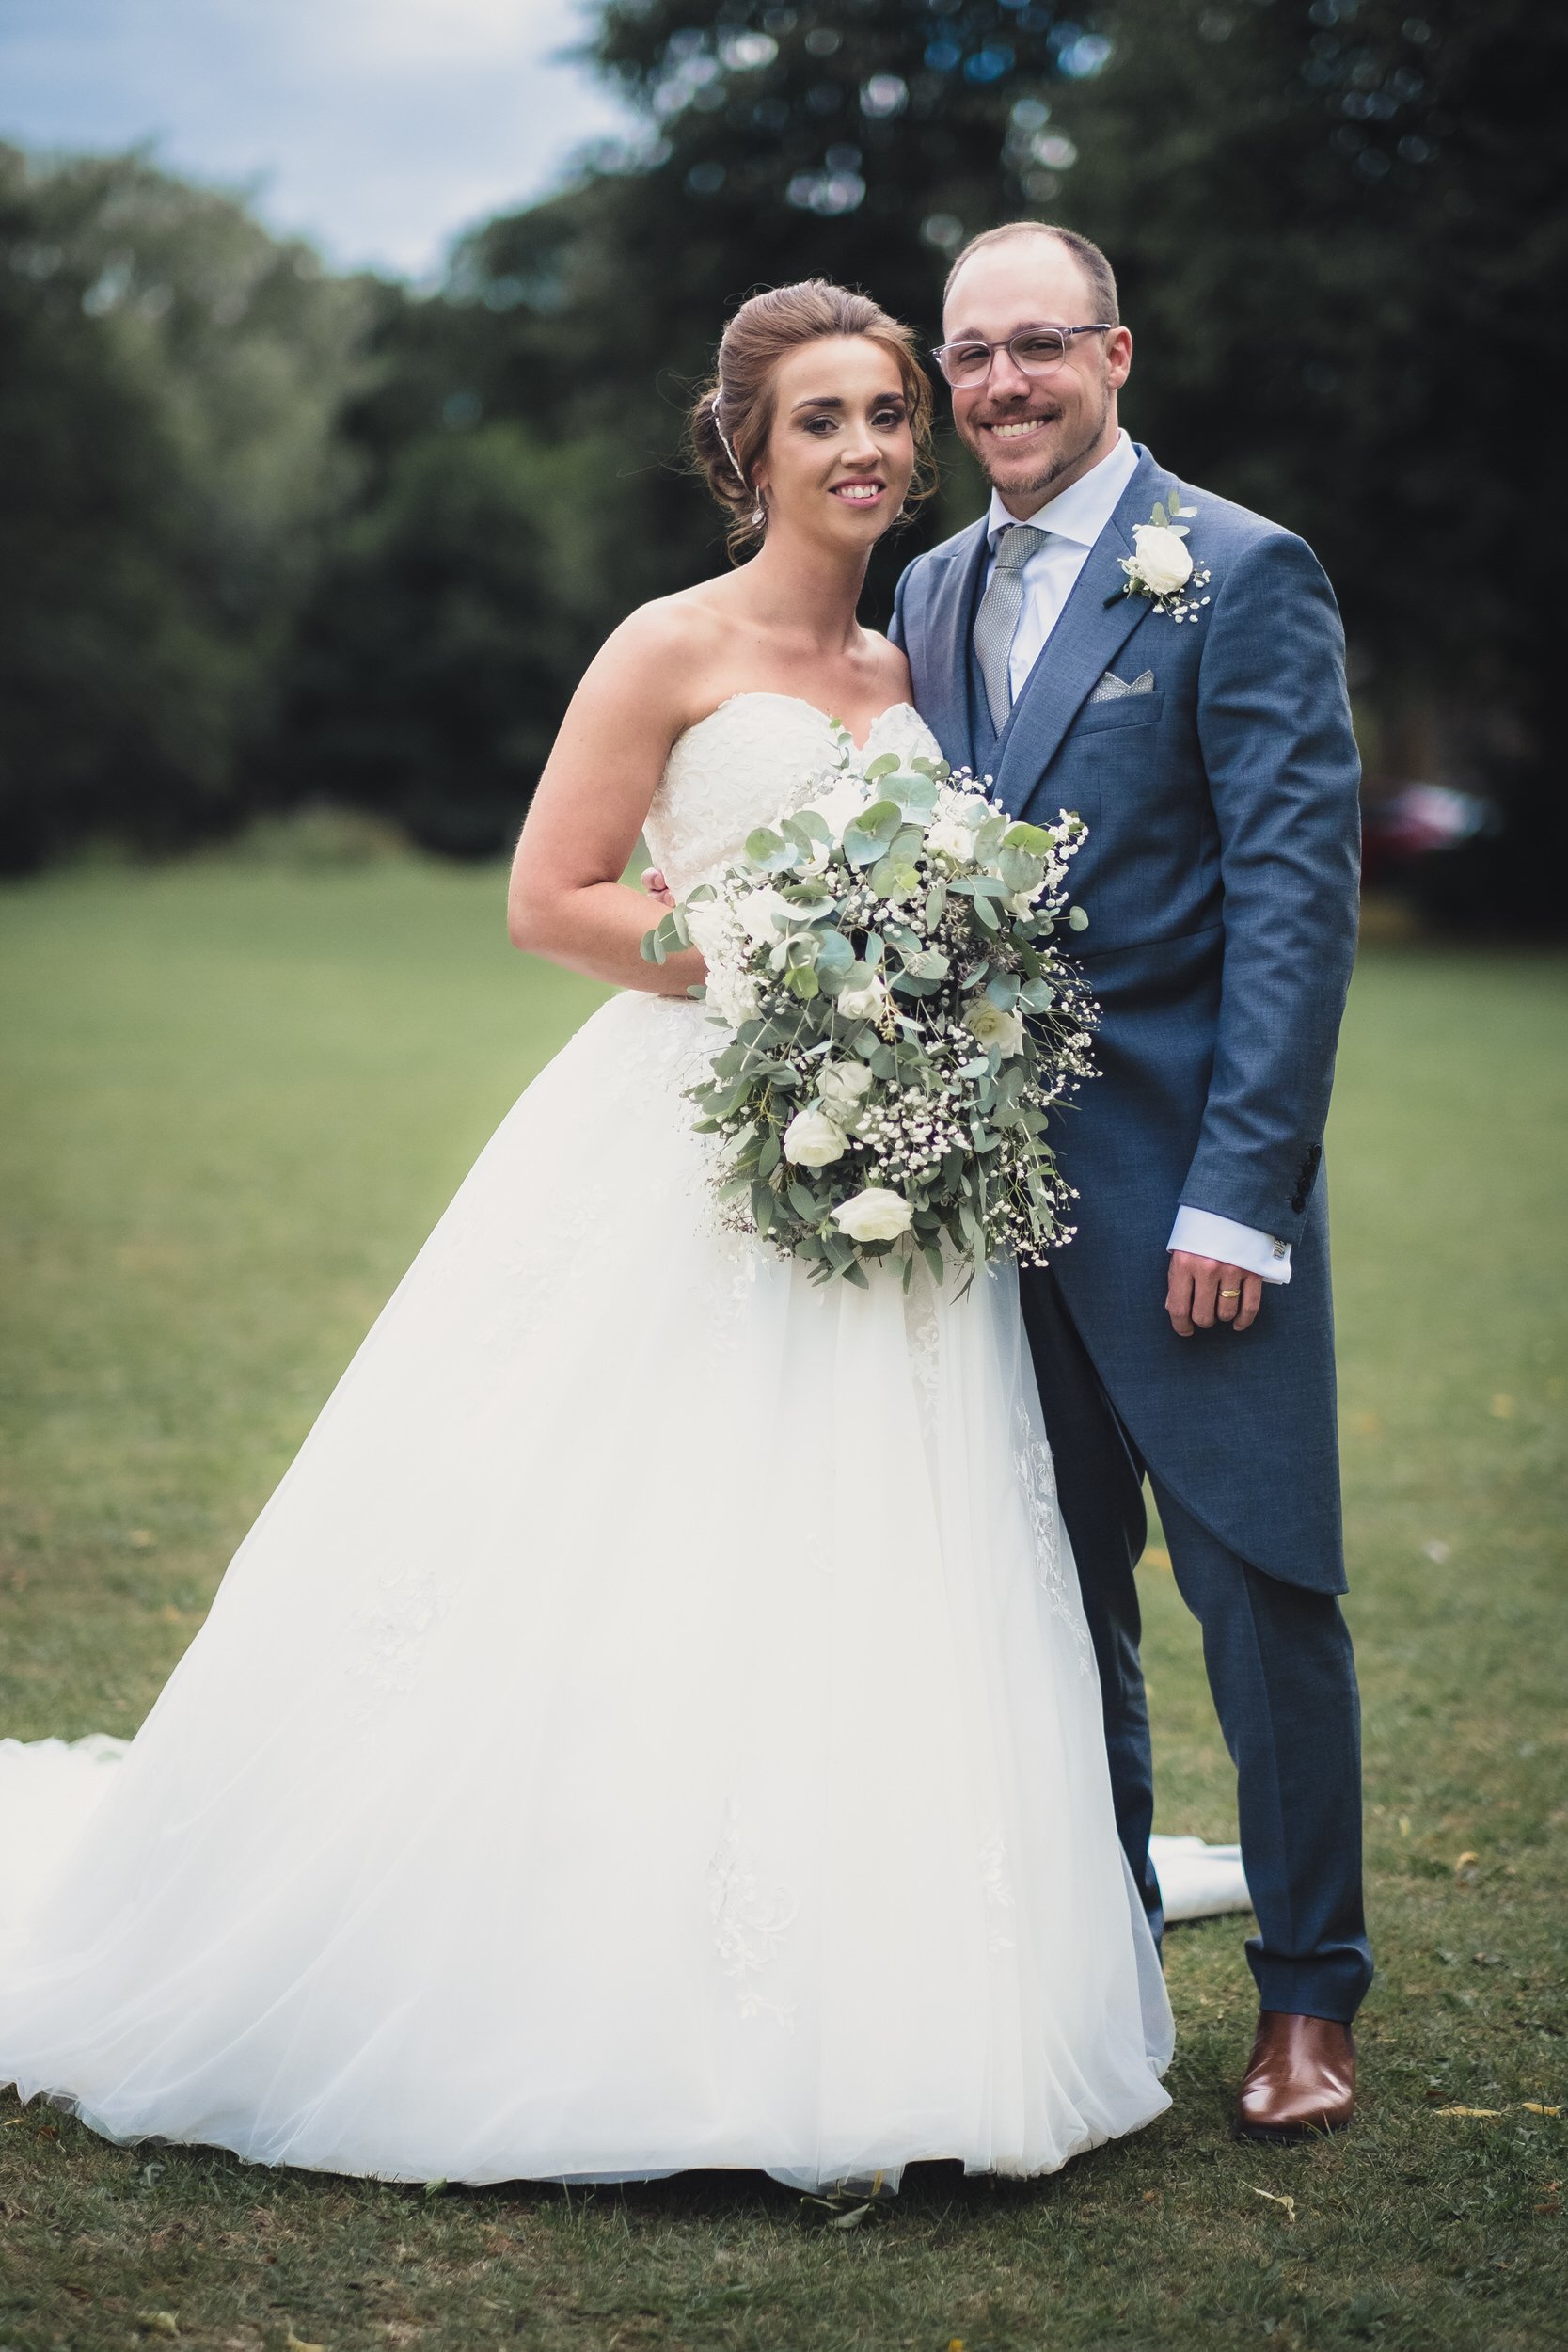 Close up of bride and groom outside | taylor wedding | wedding photography glasgow.jpg